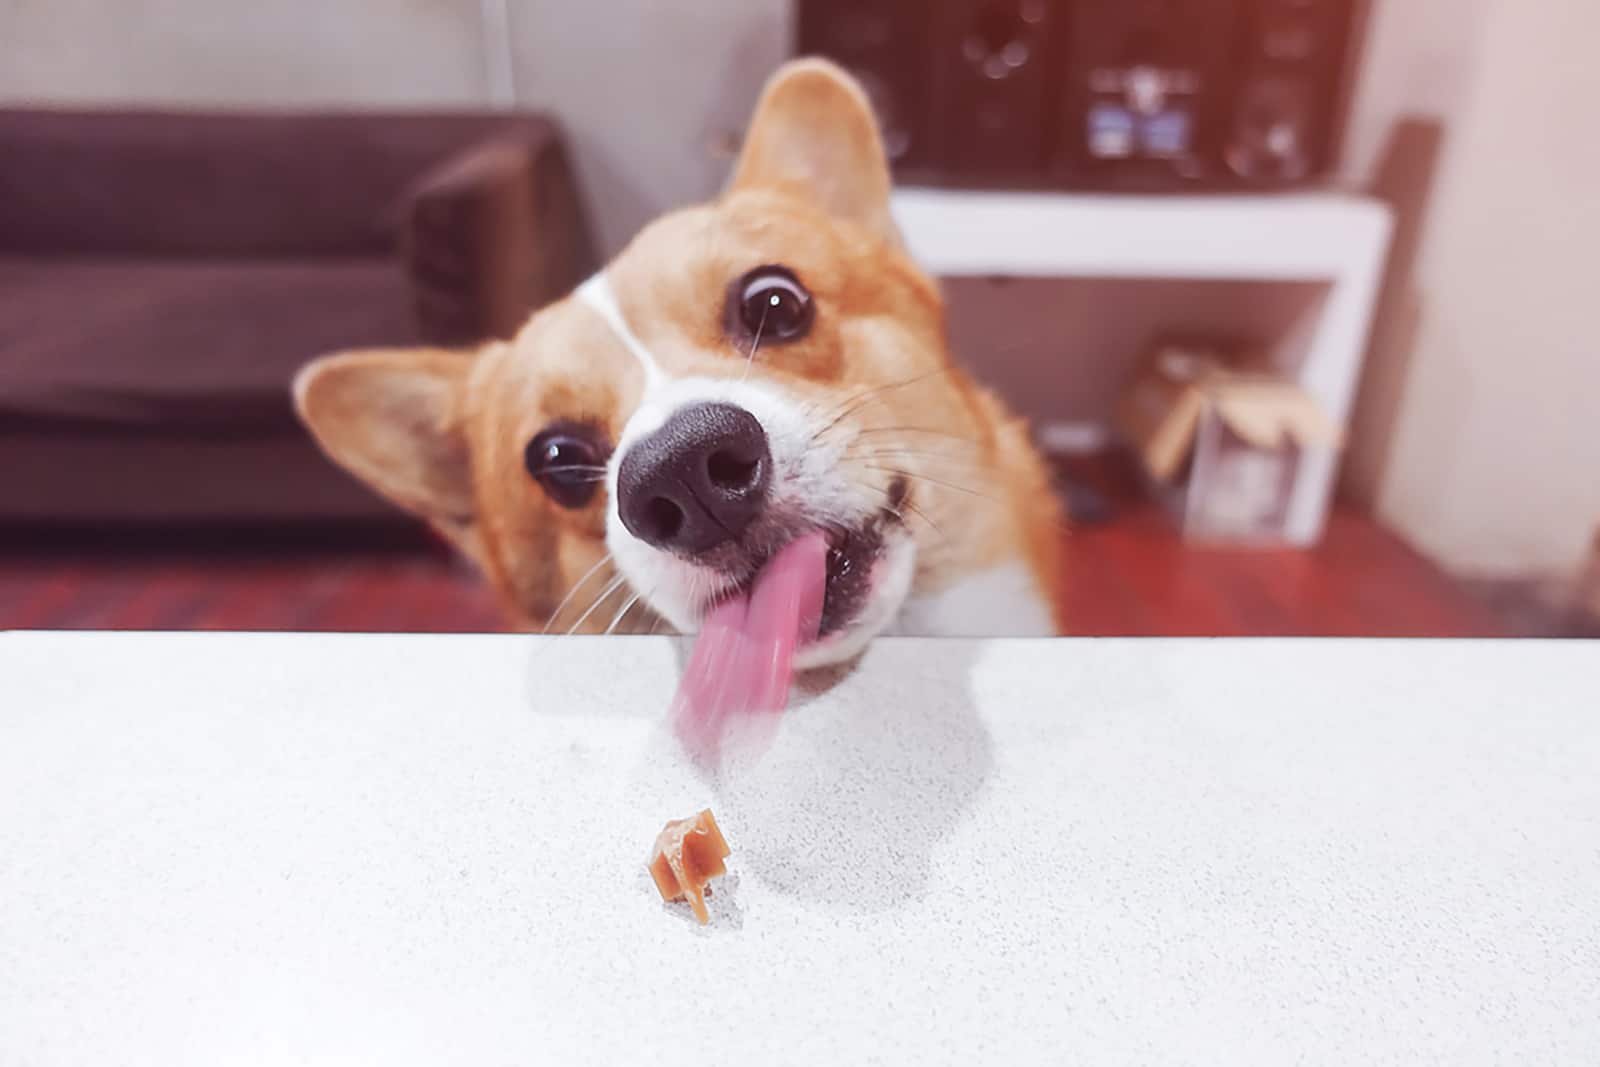 hungry corgi licking snack with a tongue from the table